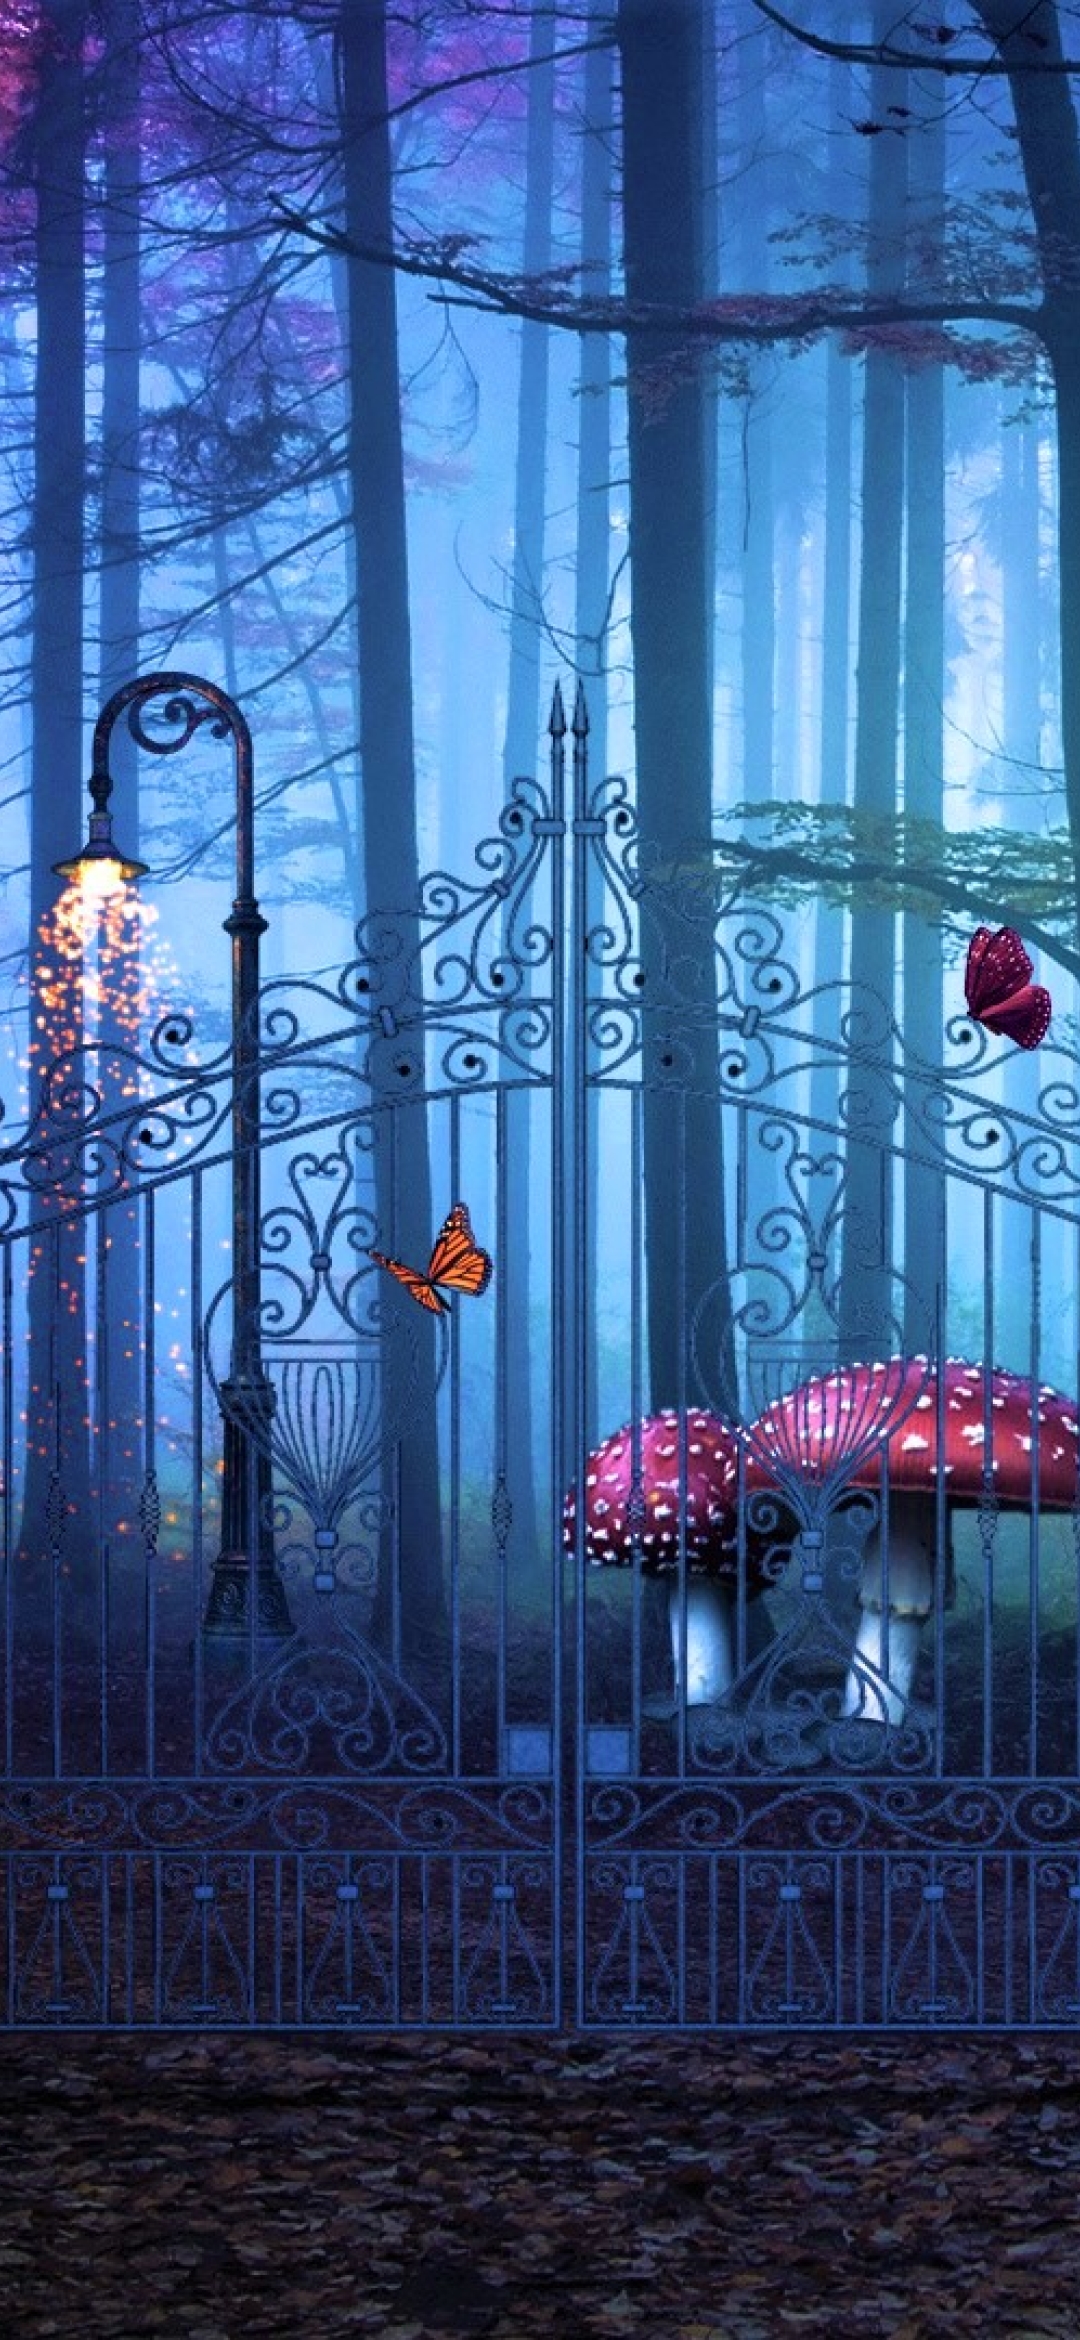 1080x2340 Magical Gate to Artistic Forest 1080x2340 Resolution